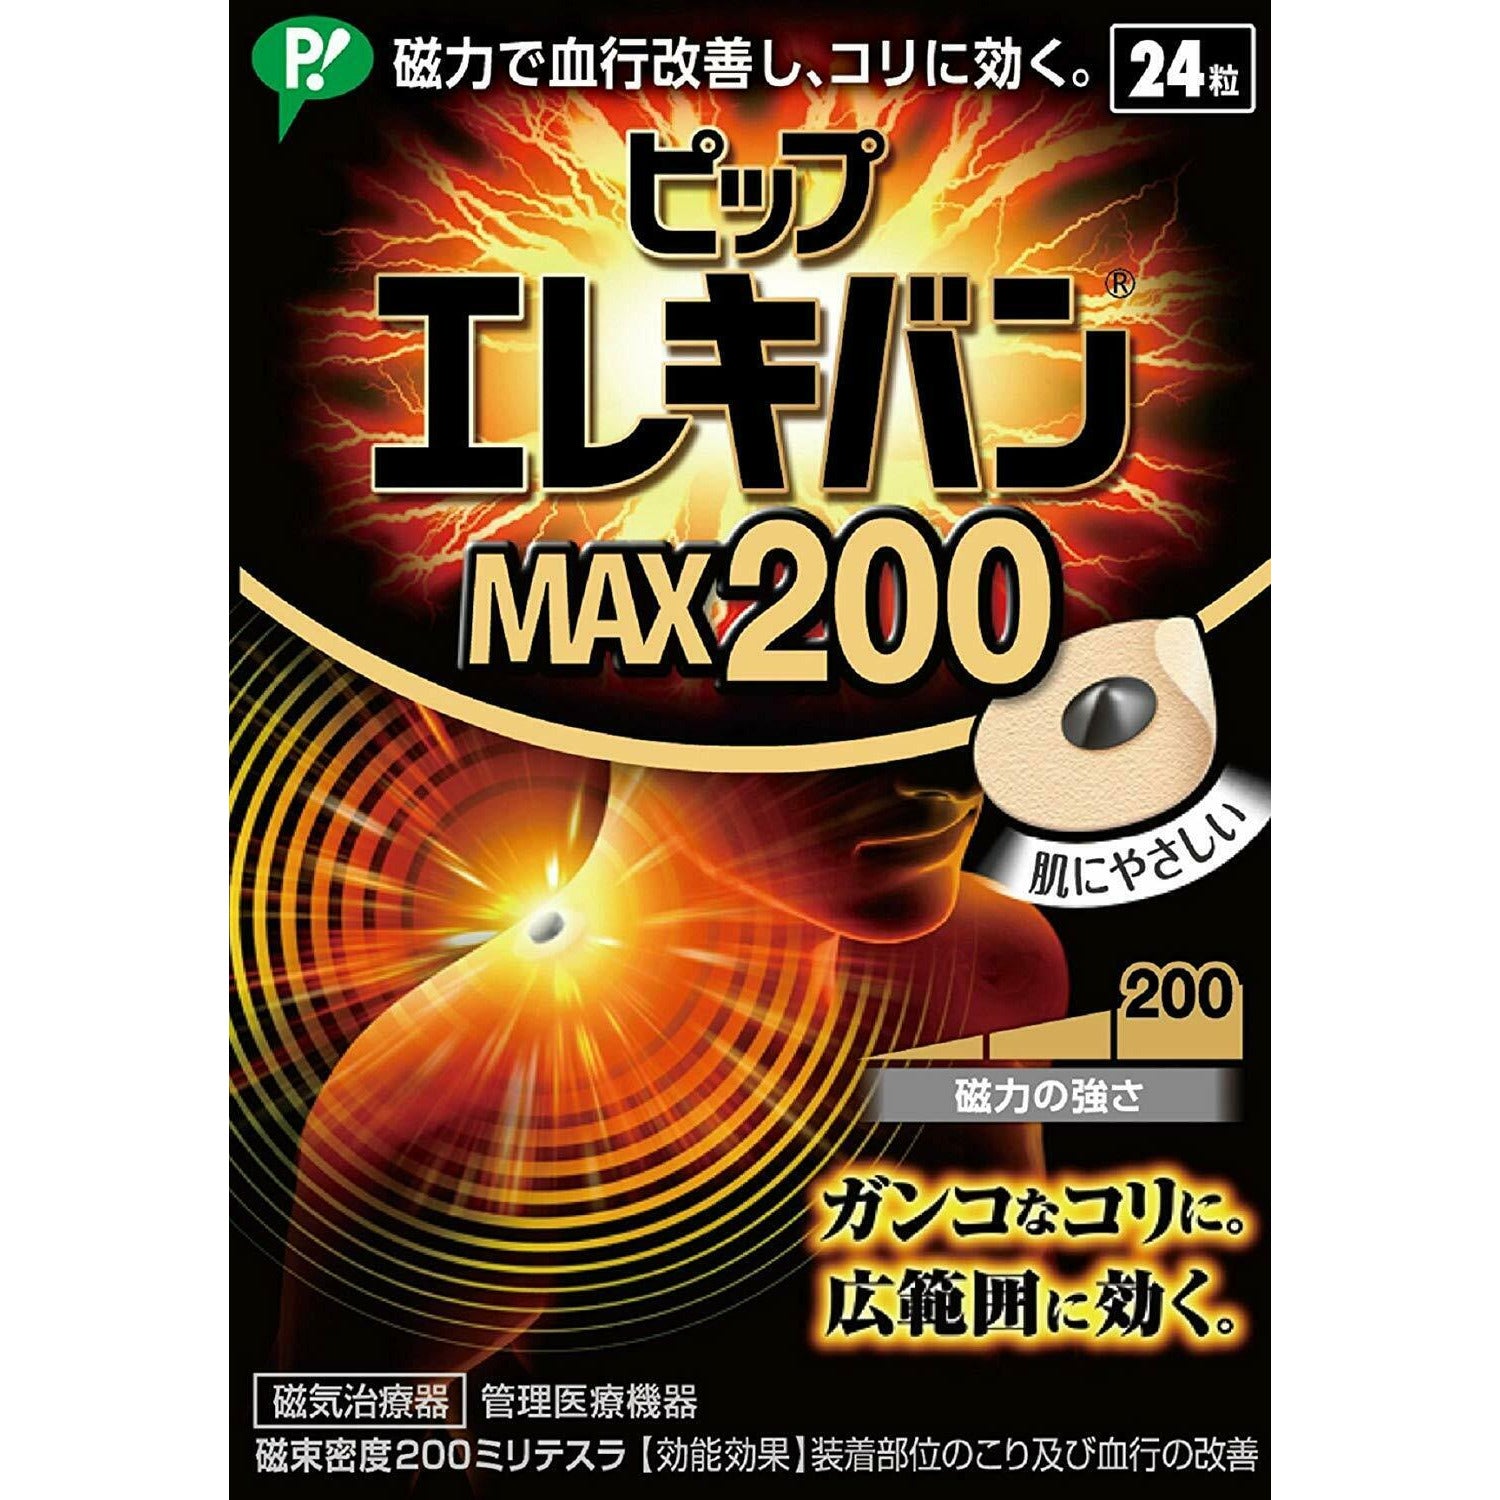 PIP ELEKIBAN MAX-200 Magnetic force patch Blood Circulation 24 pieces